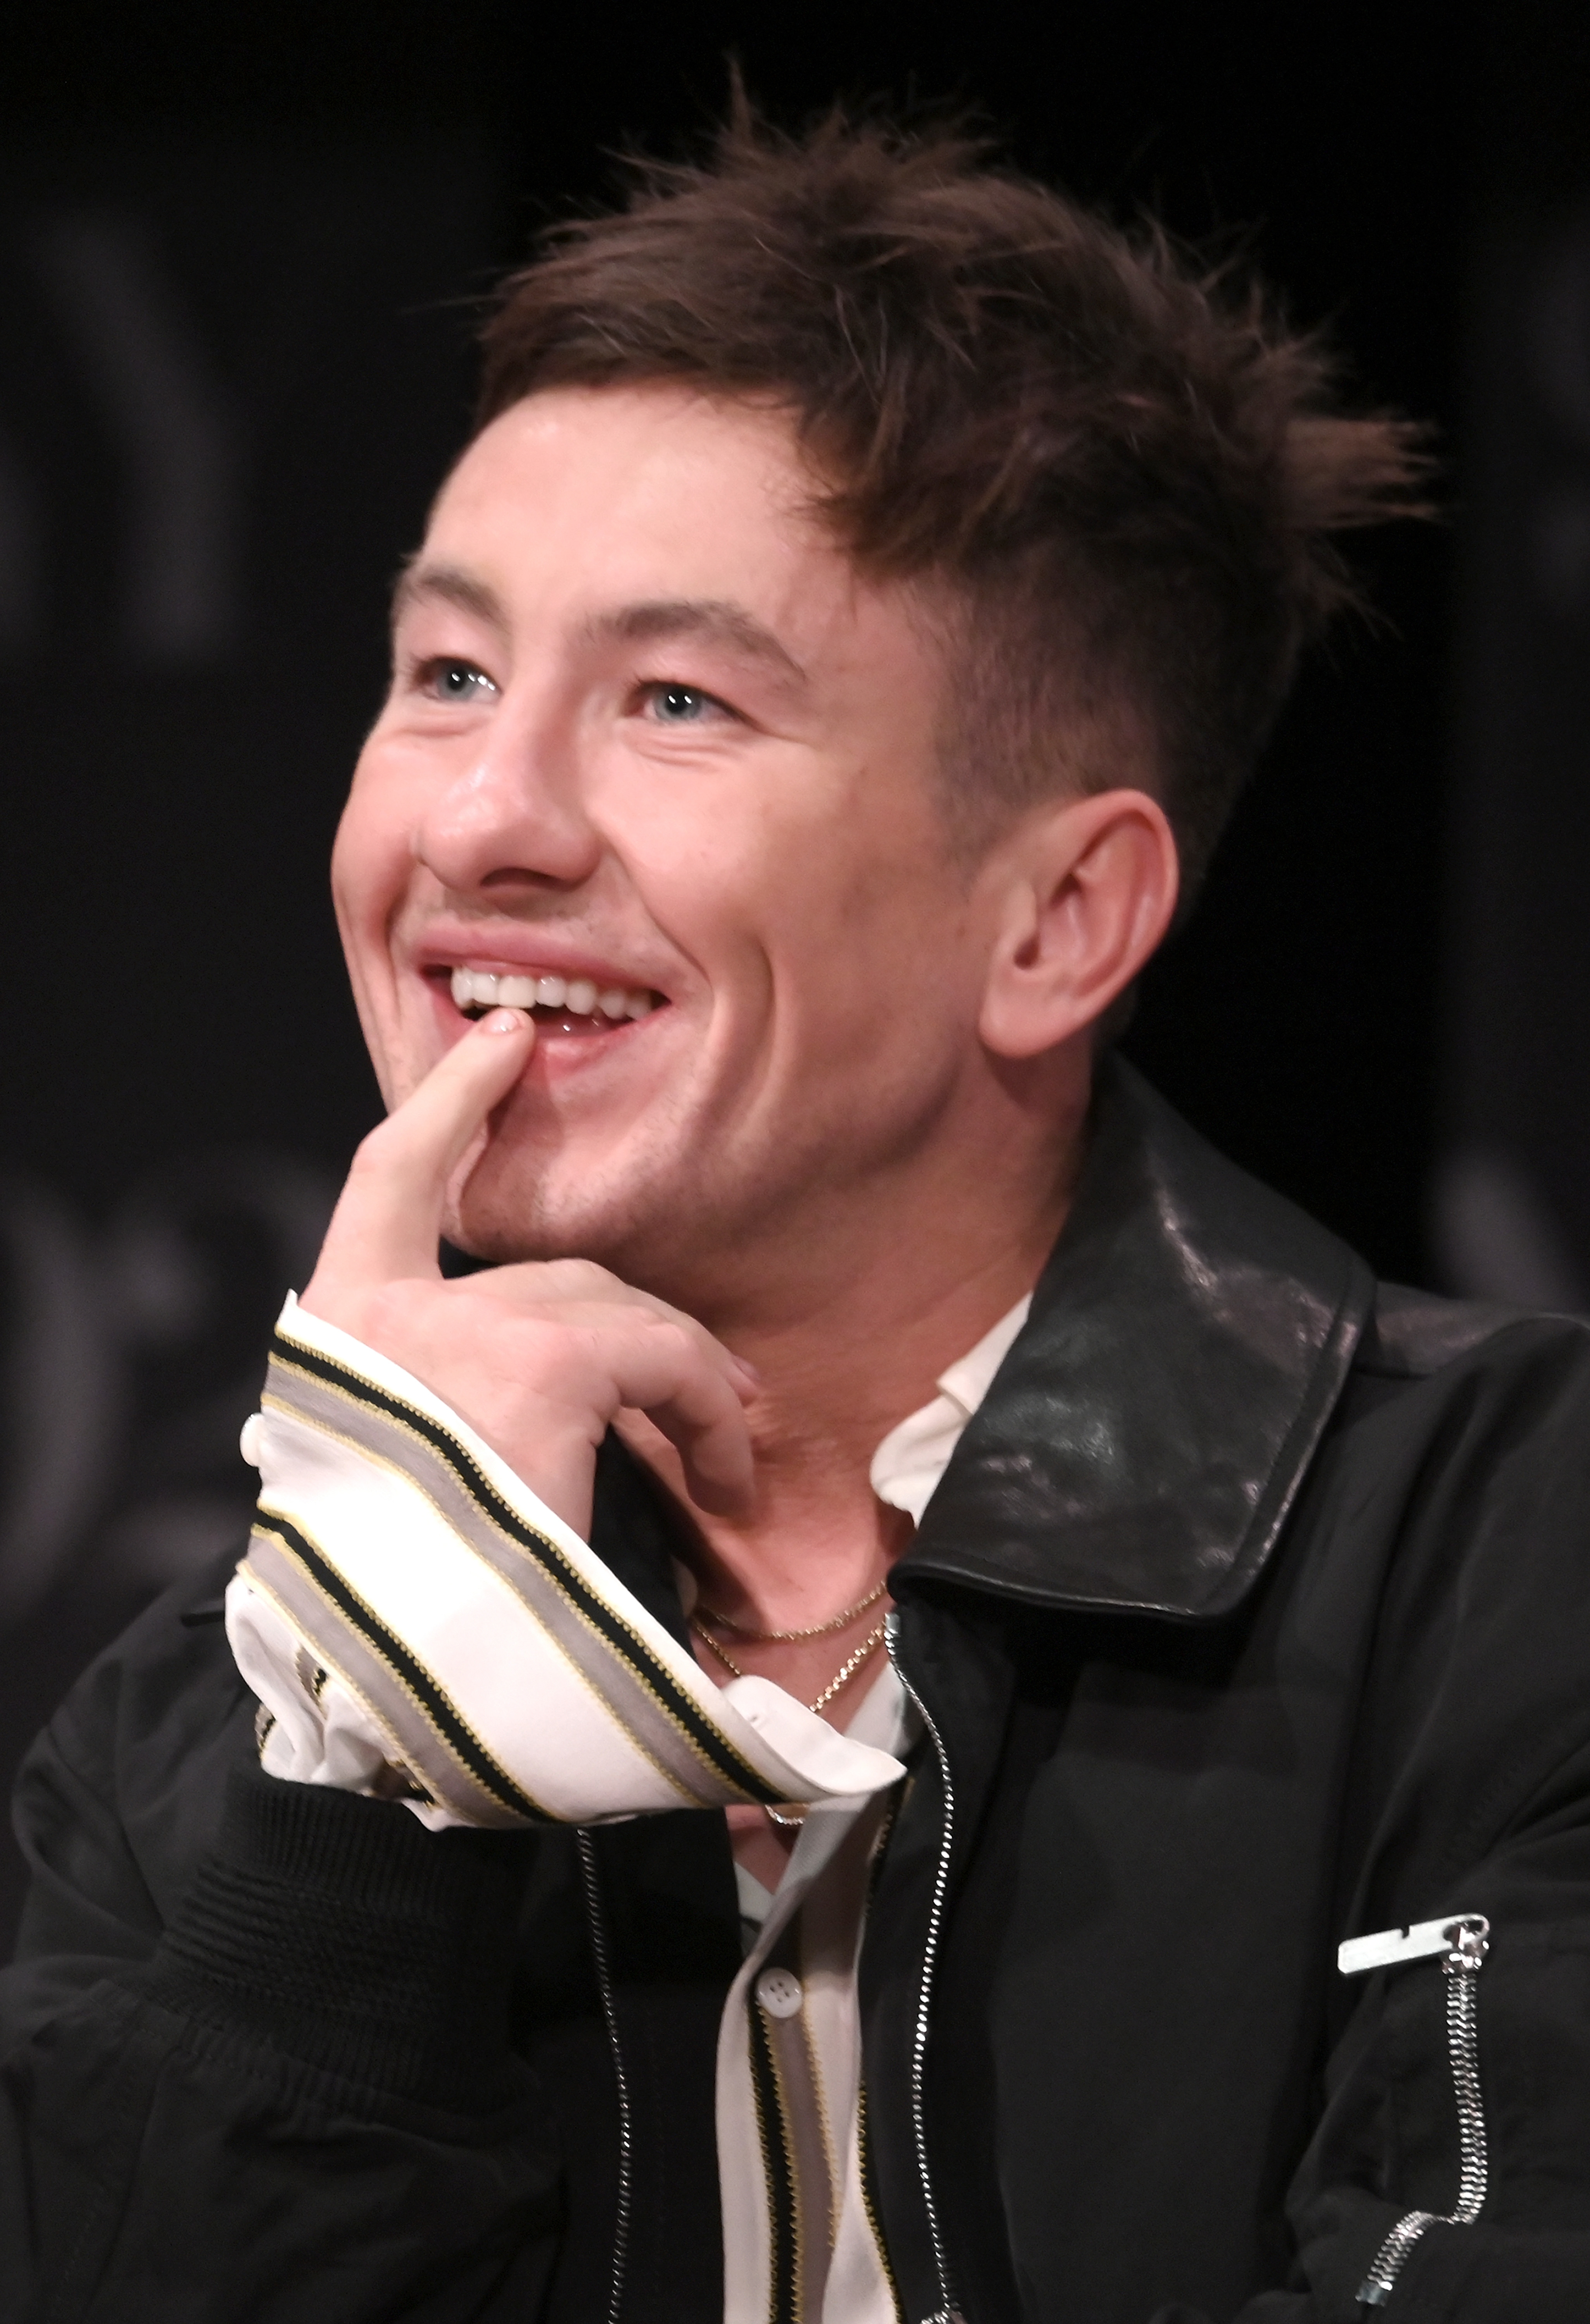 Barry smiling at an event, wearing a light jacket with